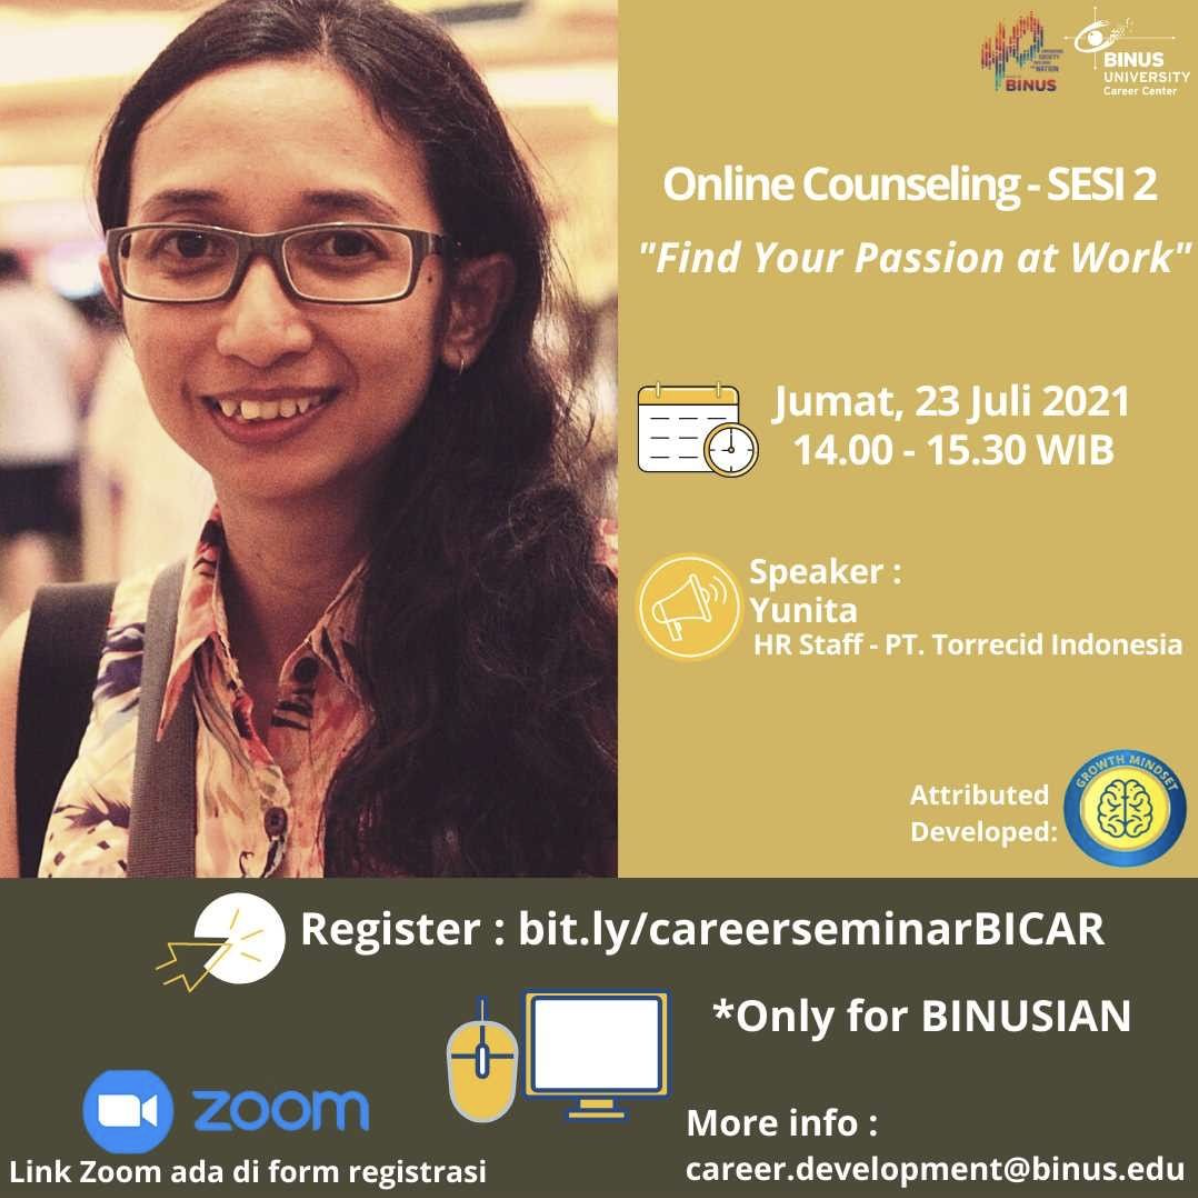 Online Counseling - Find Your Passion at Work with PT. Torrecid Indonesia